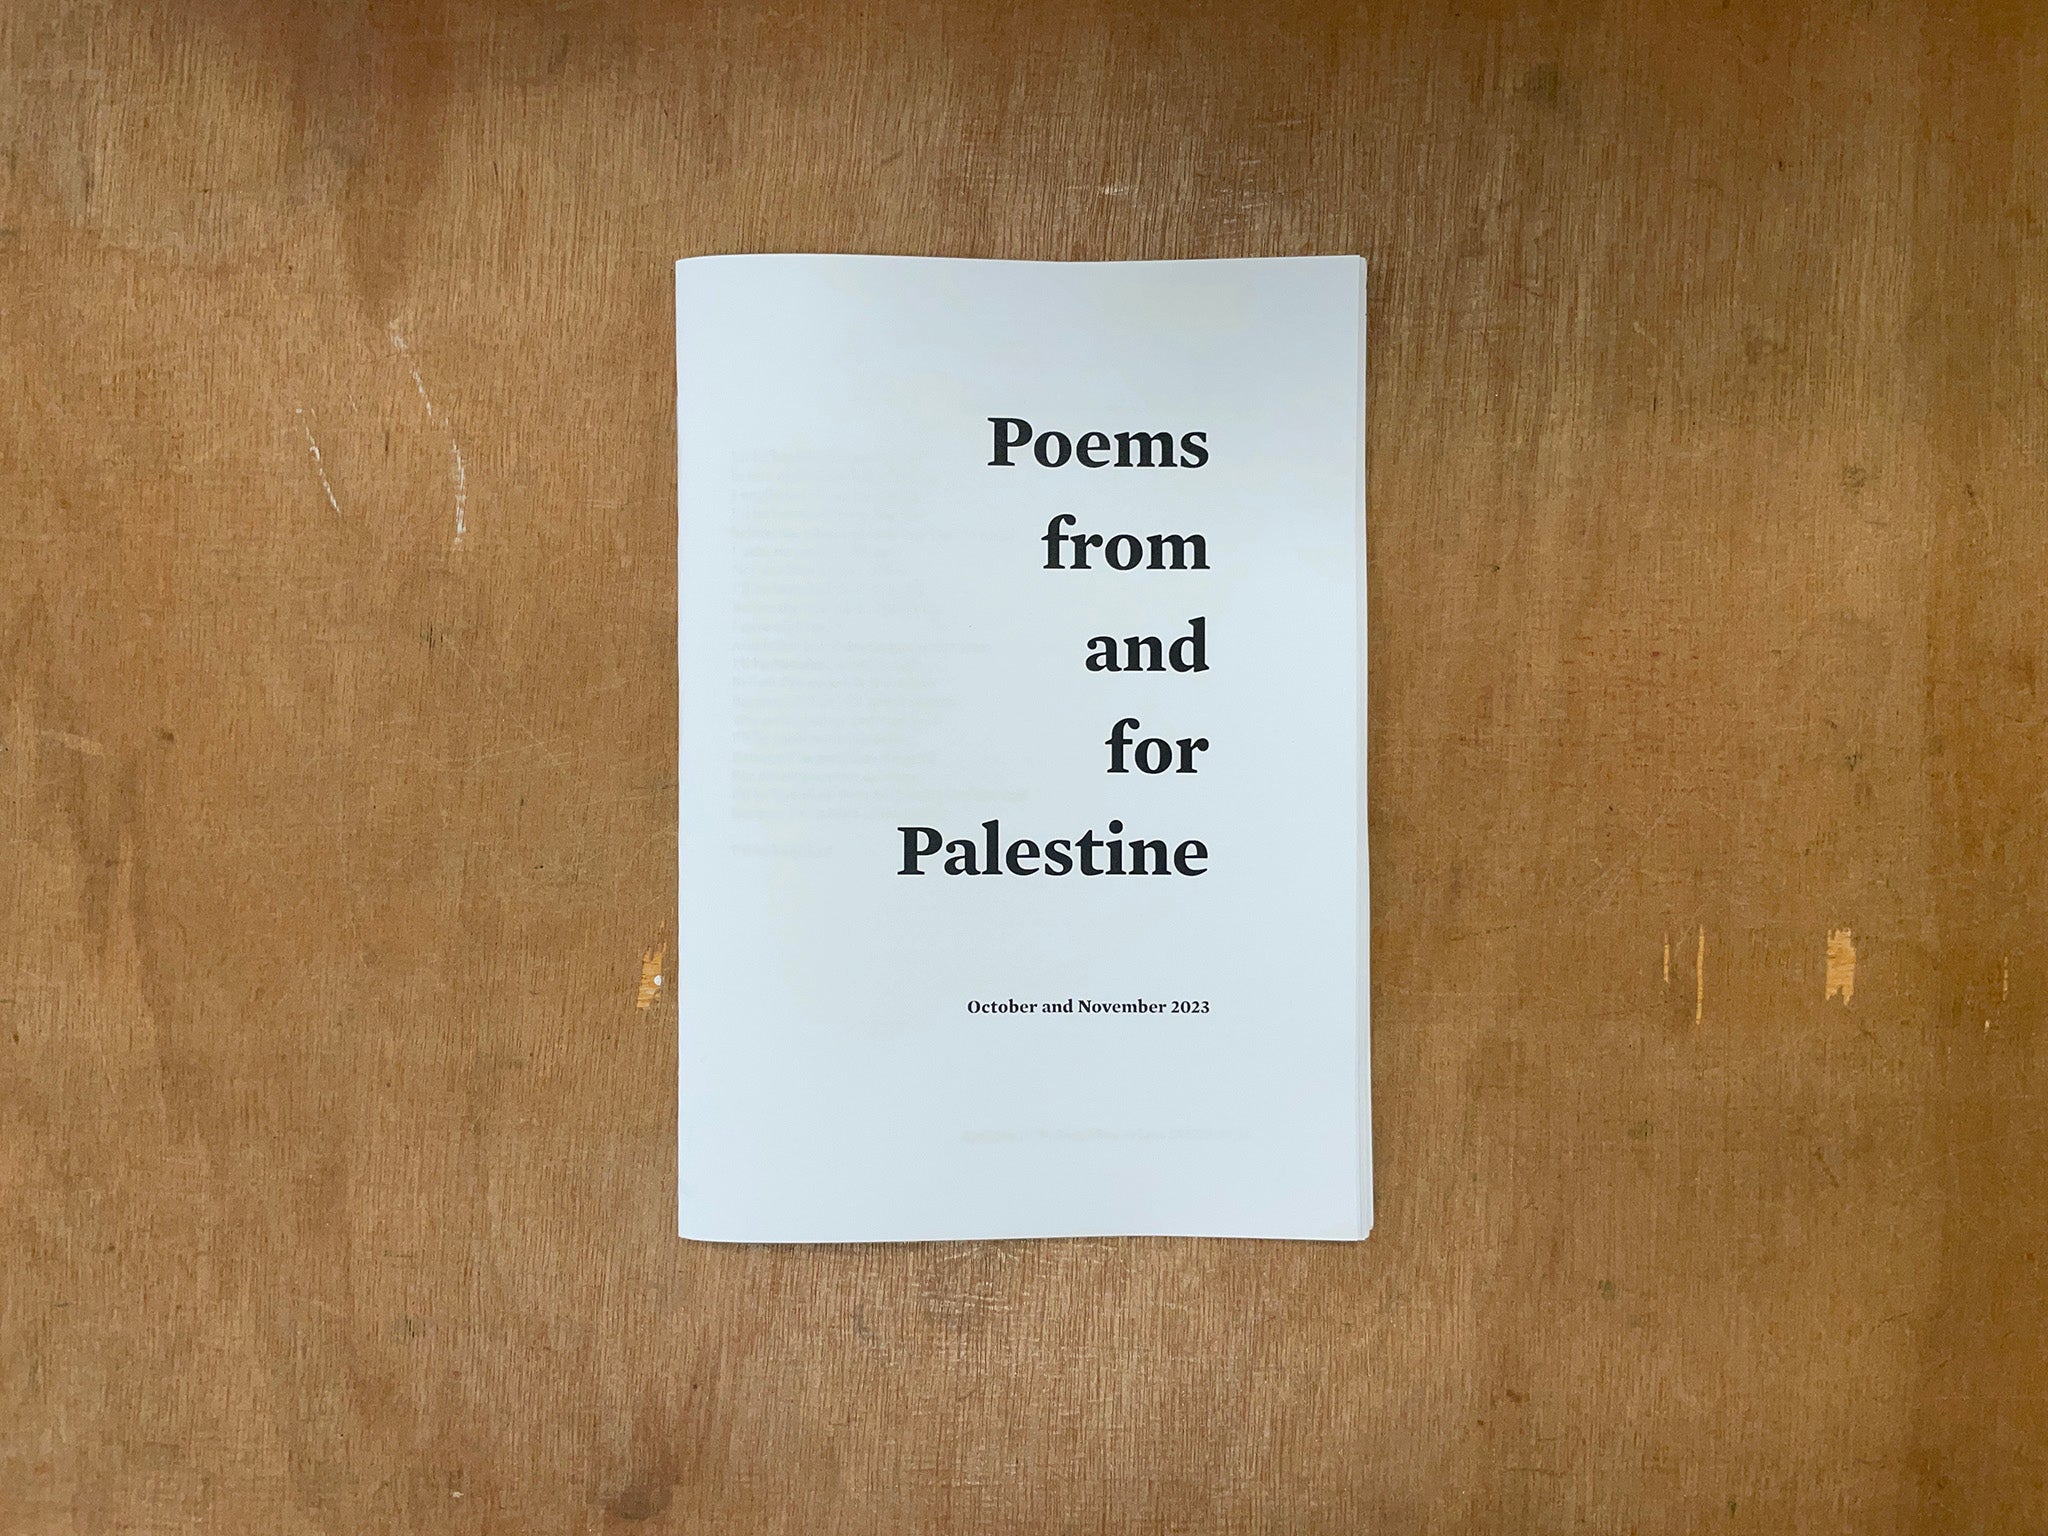 POEMS FROM AND FOR PALESTINE by Various Authors